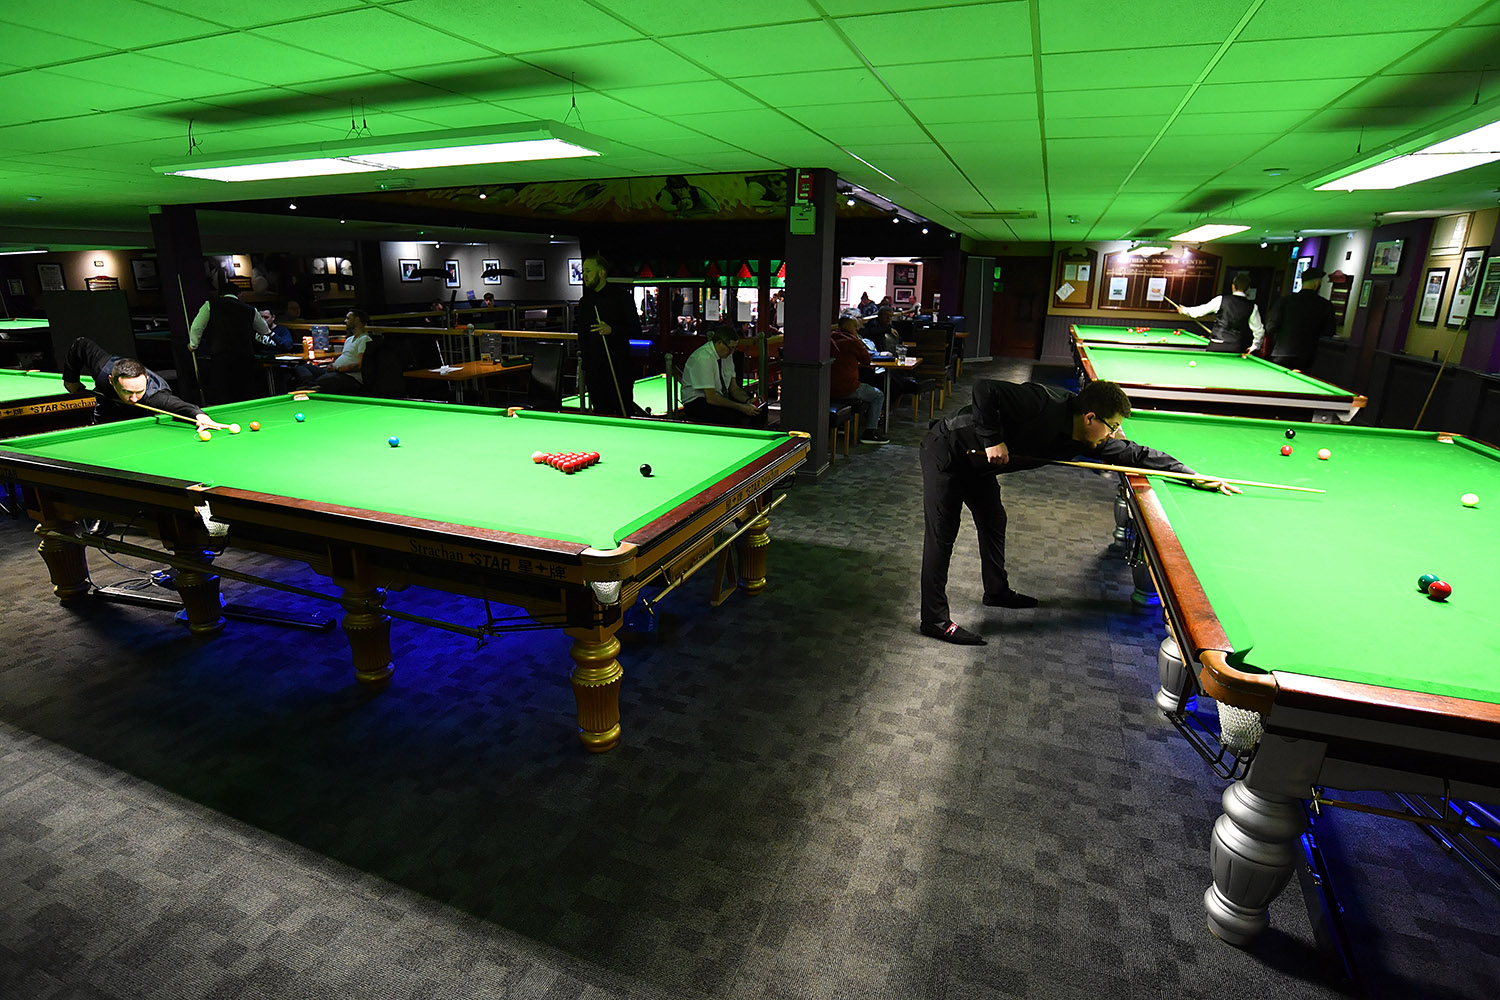 world snooker tour events